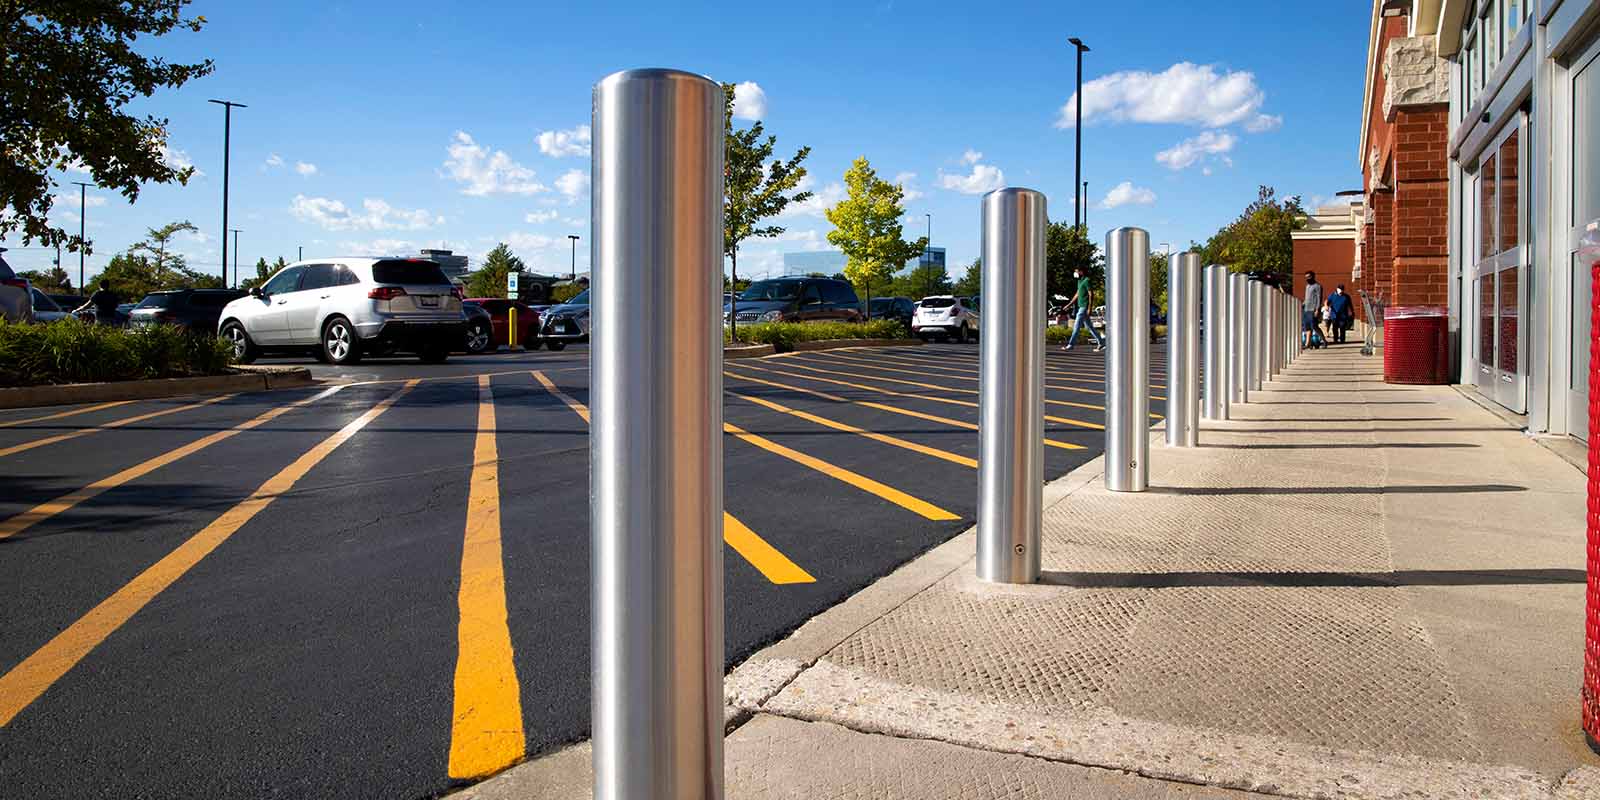 Safety Bollards: What Are They and Where Do I Need Them?